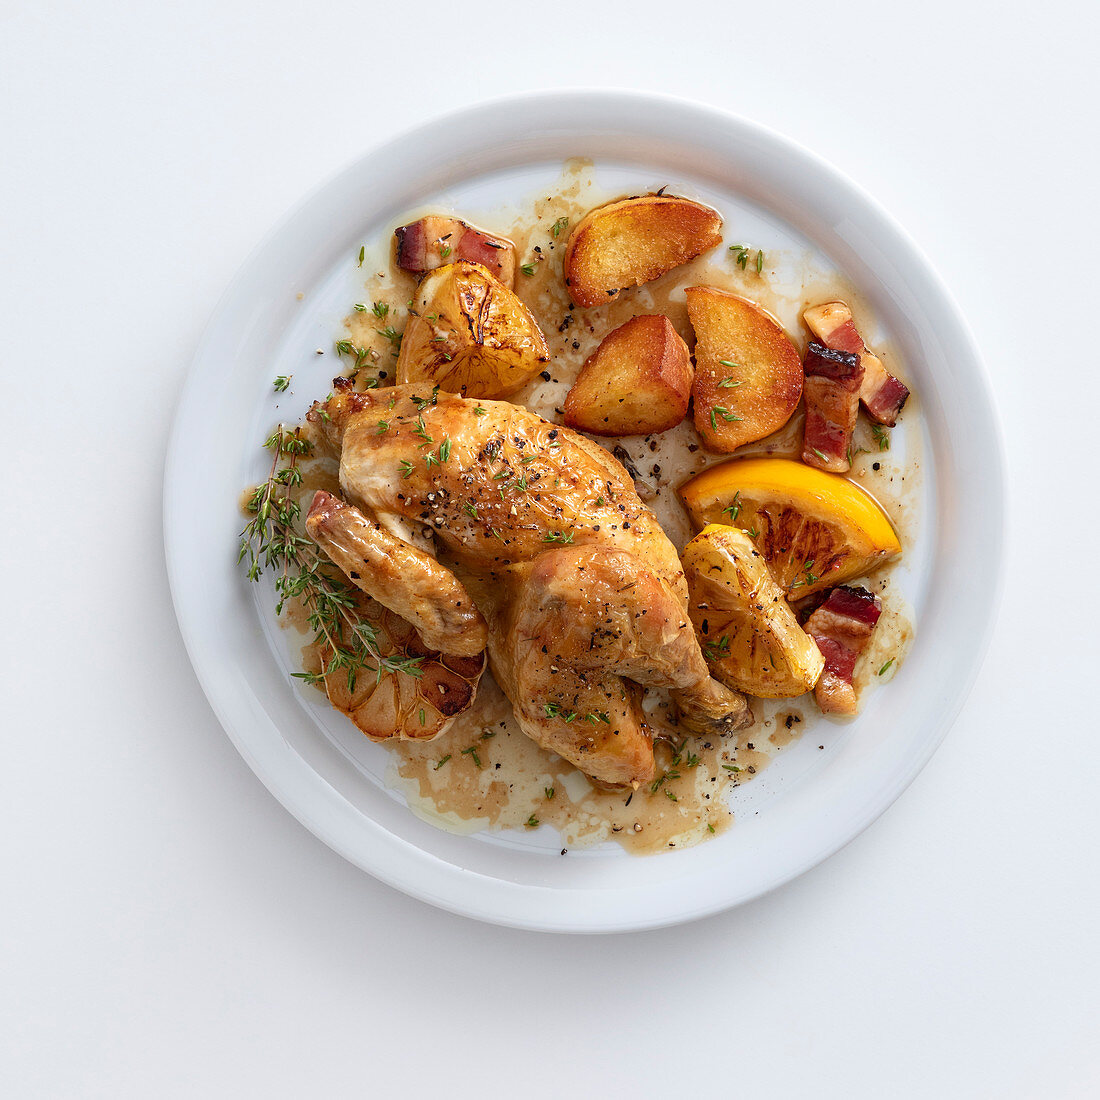 Lemon chicken with bacon, potatoes and thyme on a plate